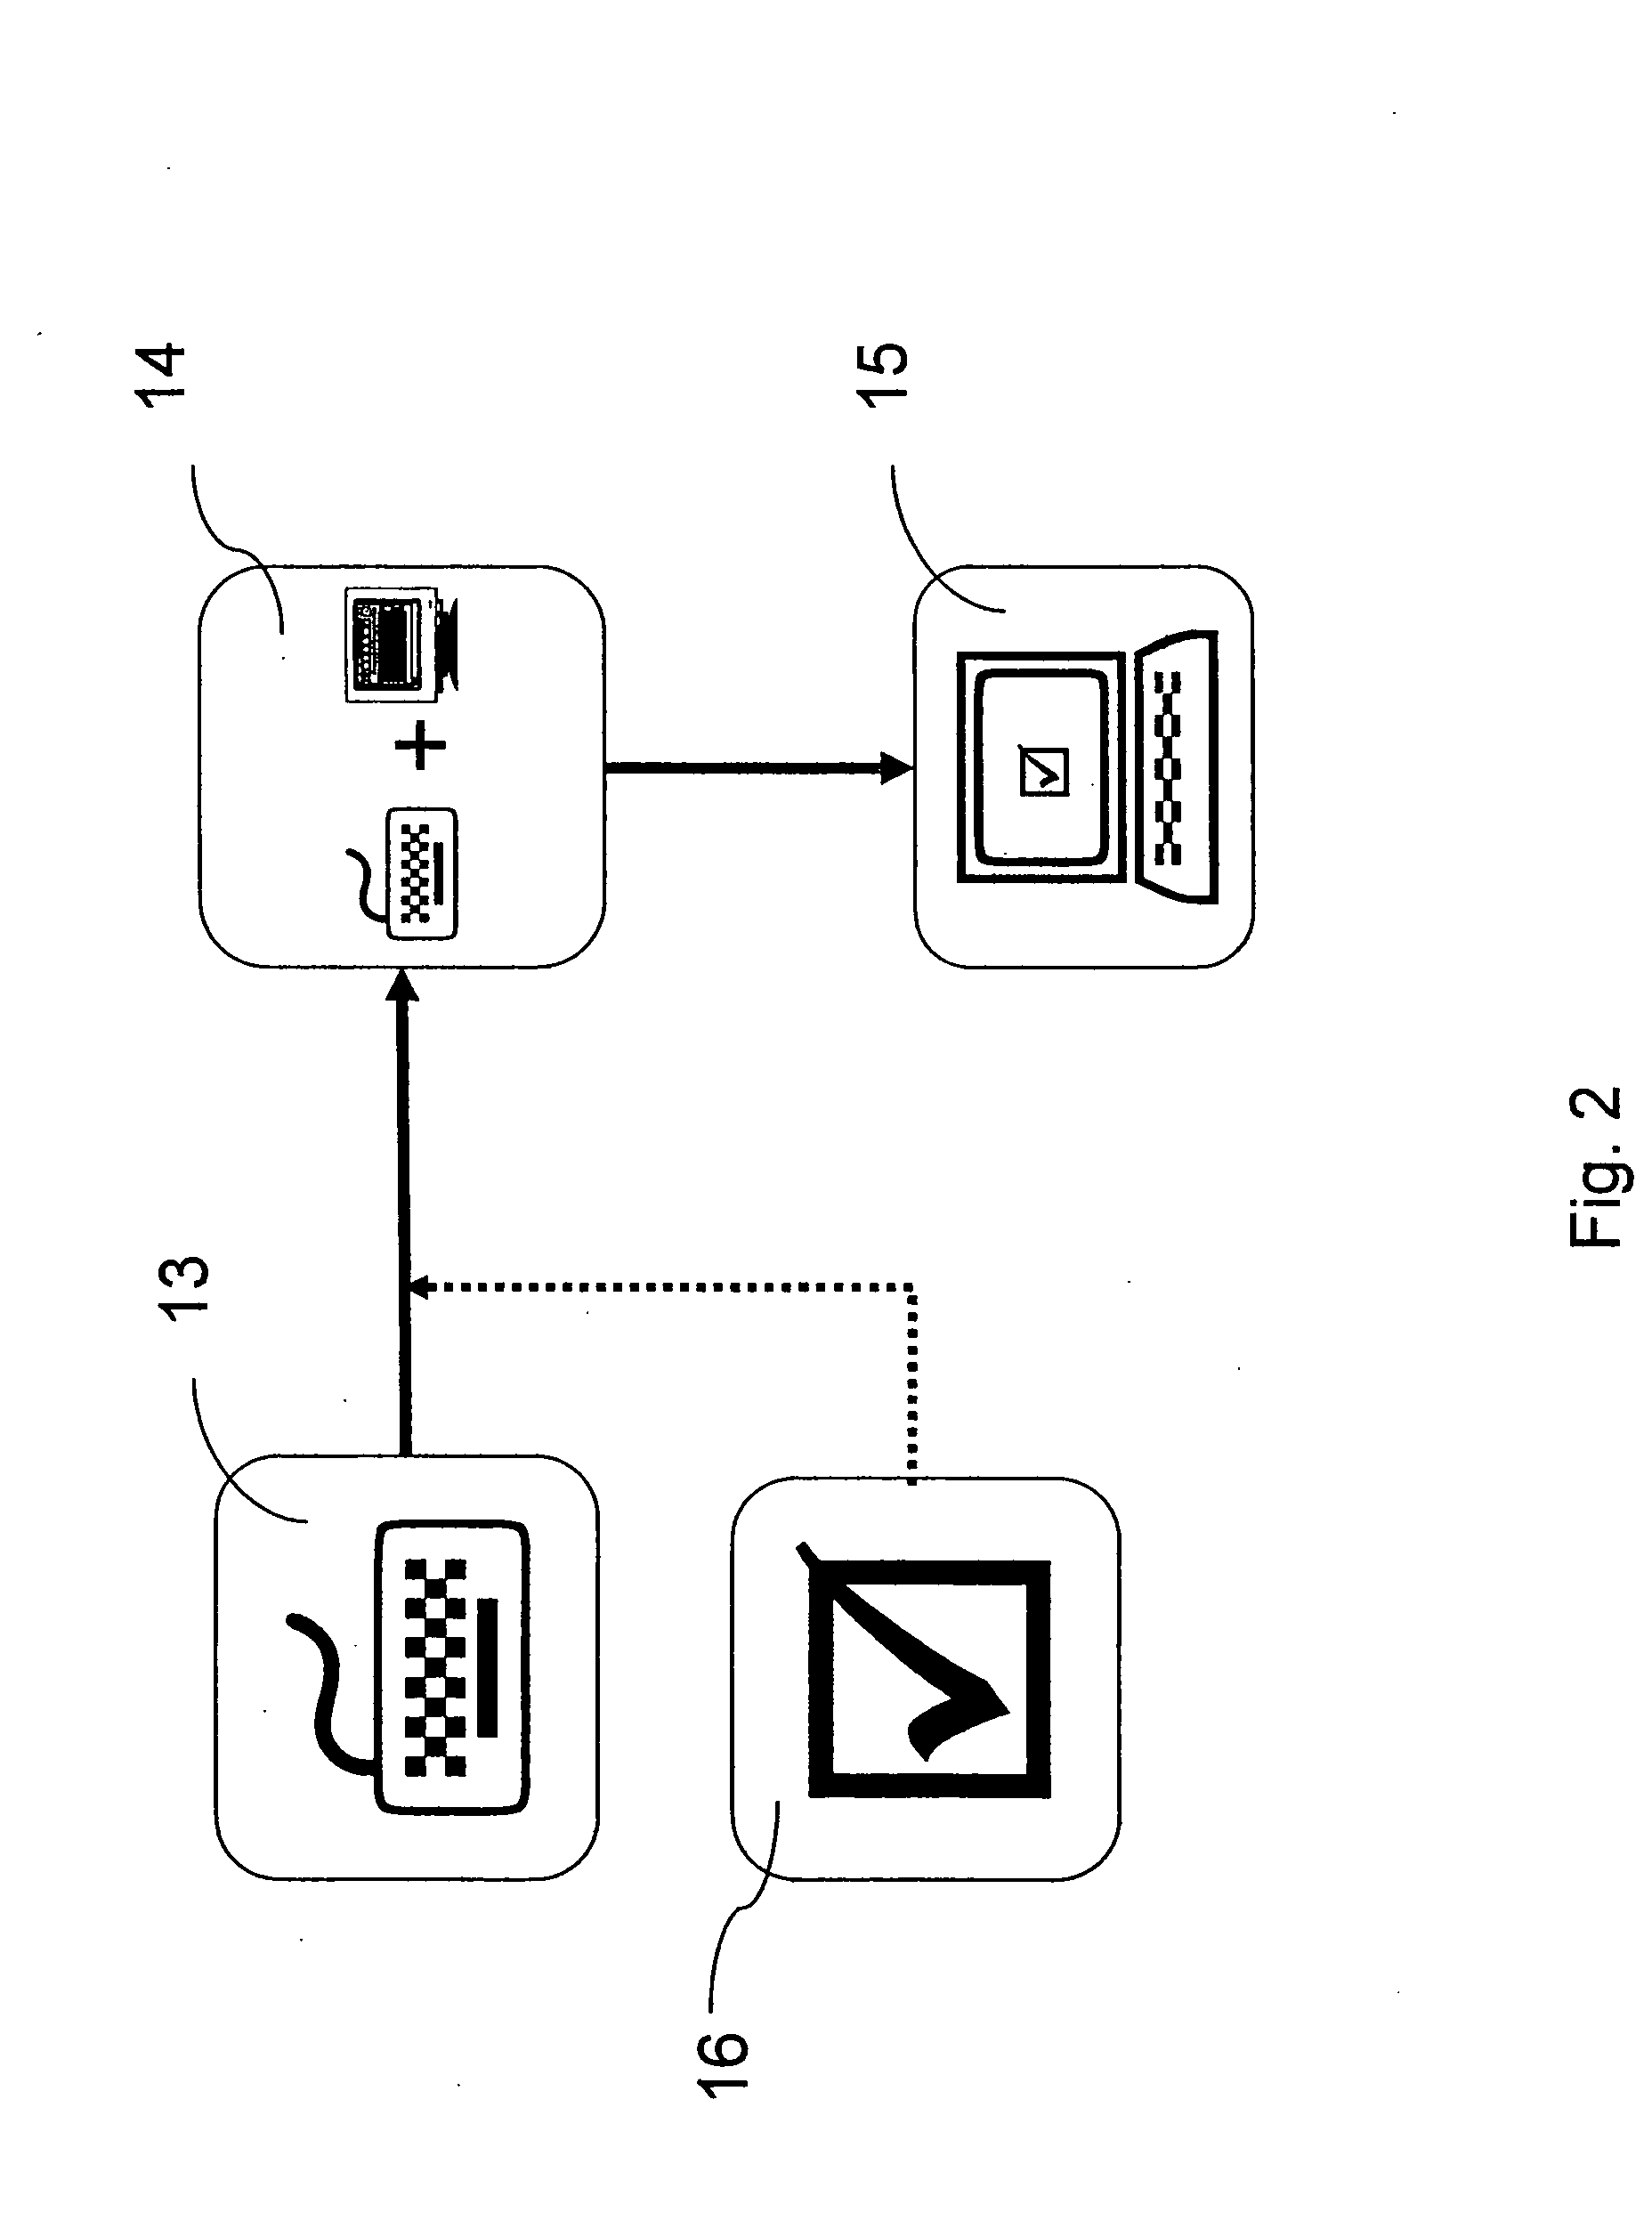 Method of announcing a user of a computer and the activation and starting of several programs installed on a computer